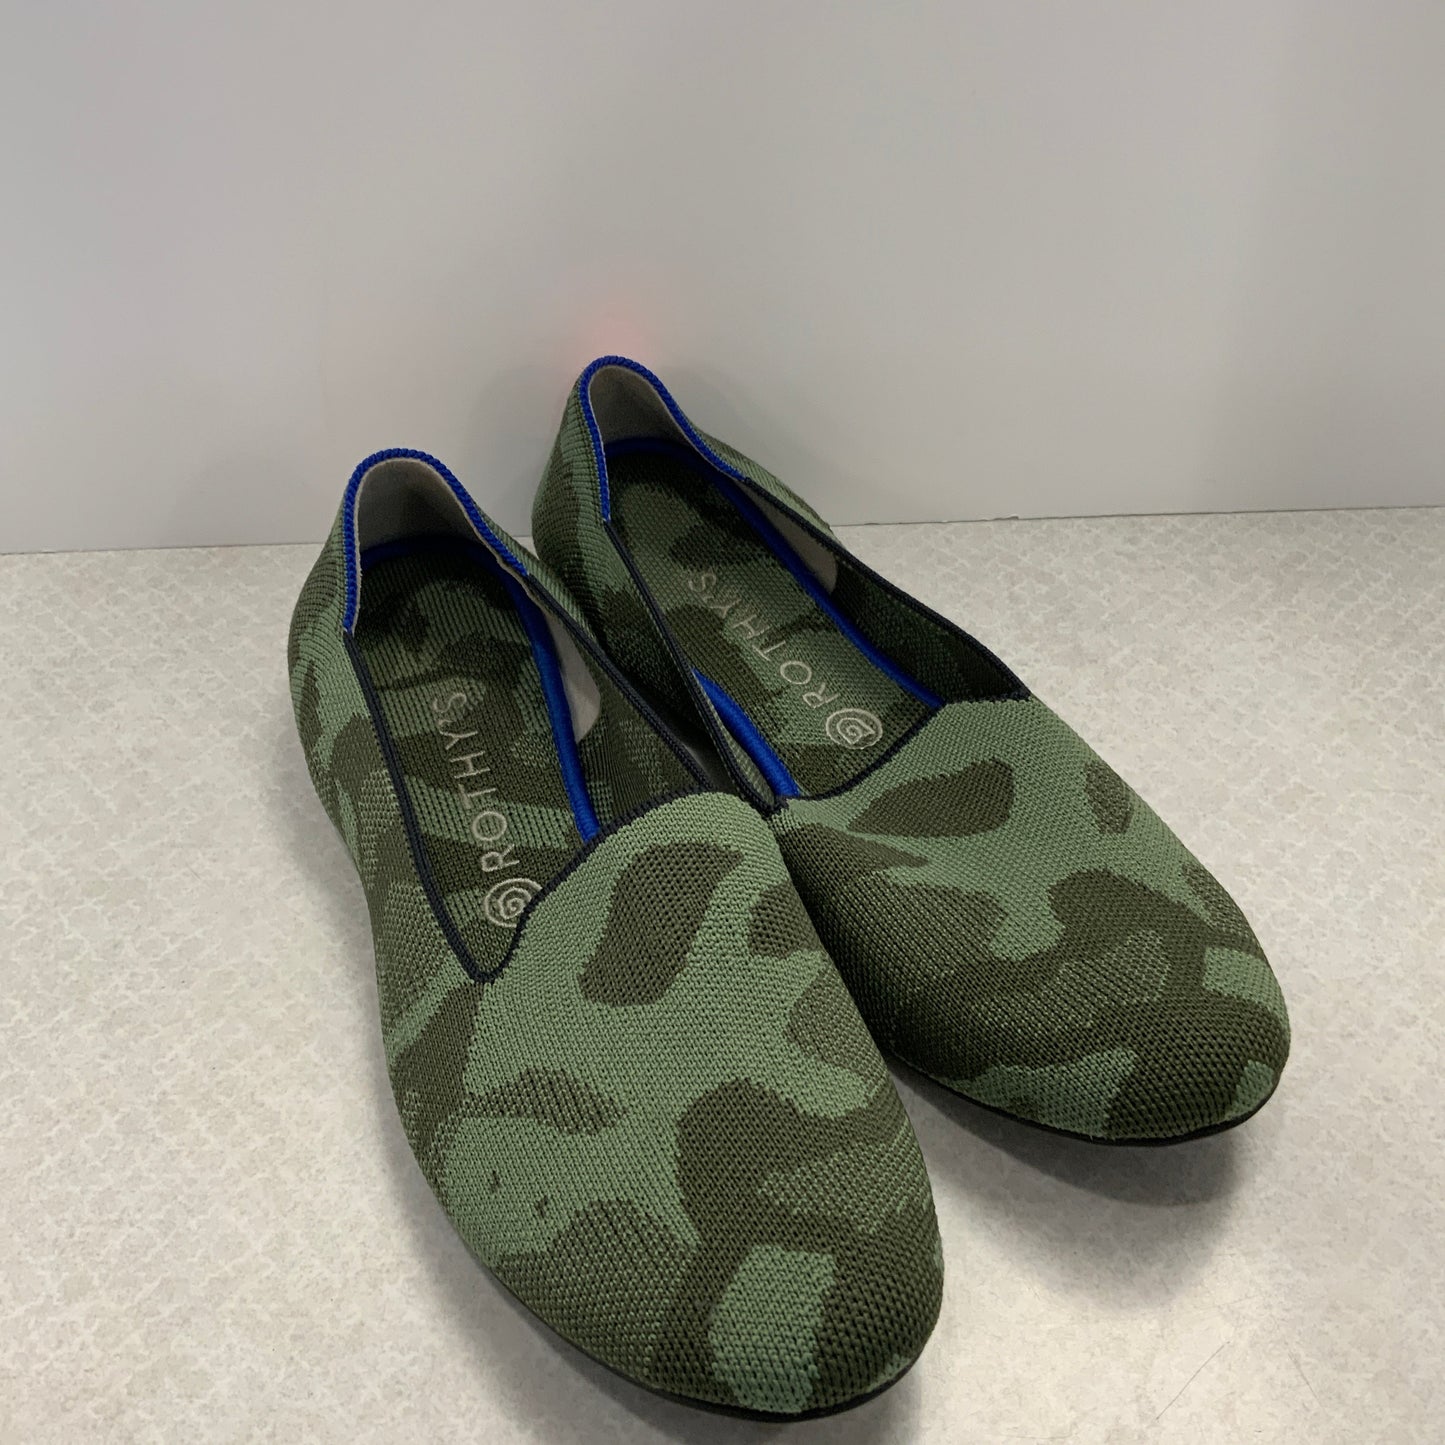 Camouflage Print Shoes Flats Rothys, Size 11